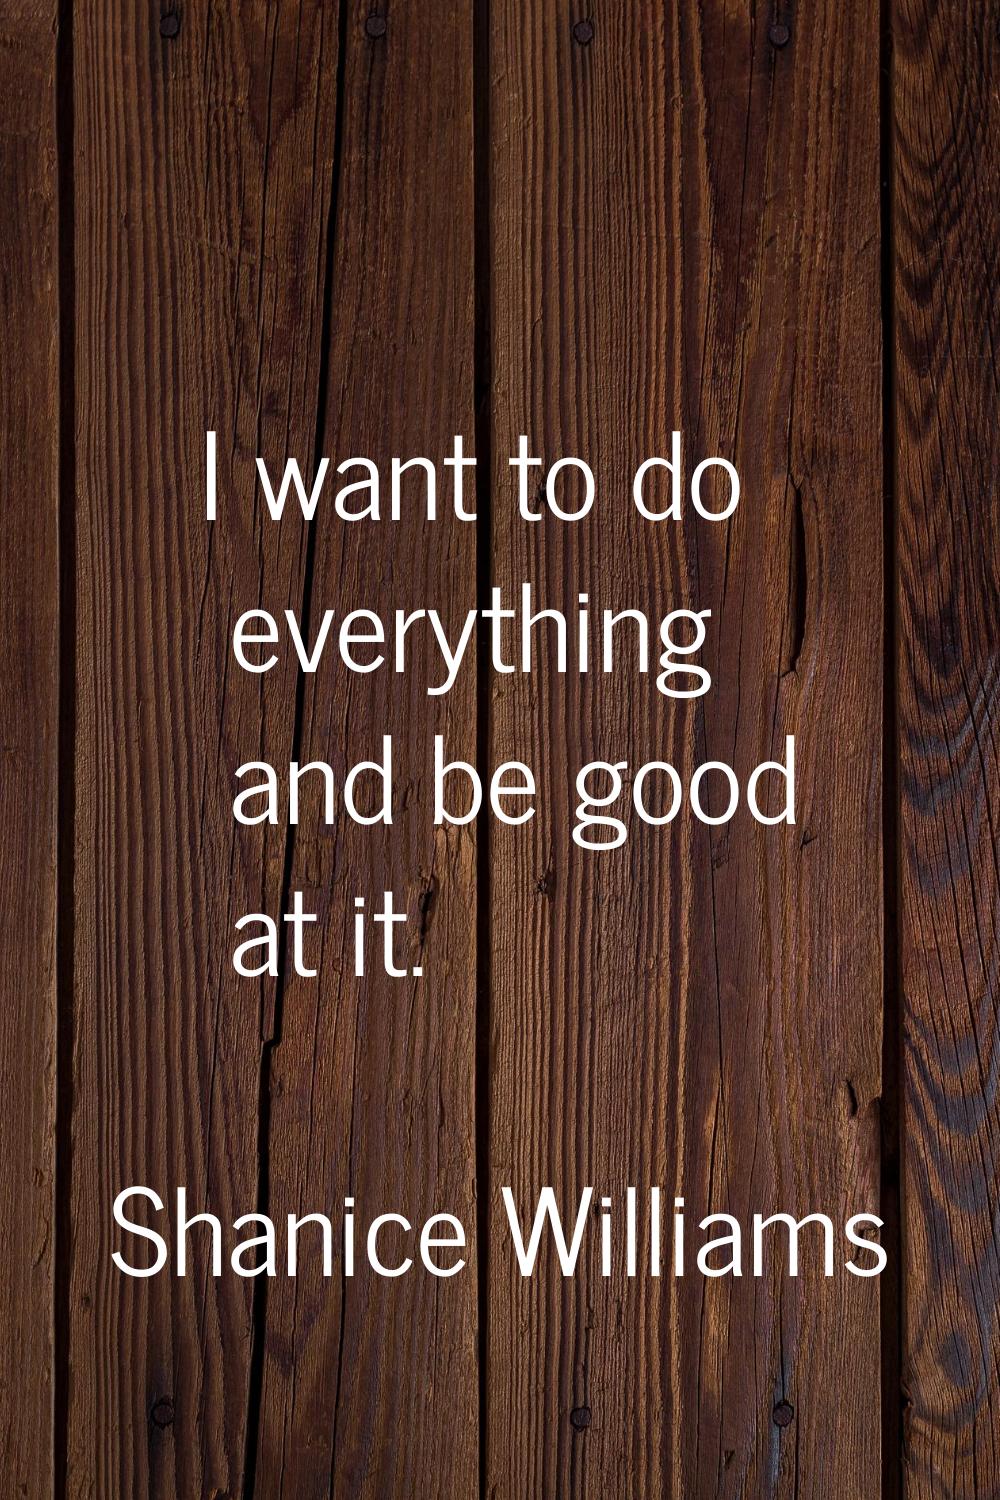 I want to do everything and be good at it.